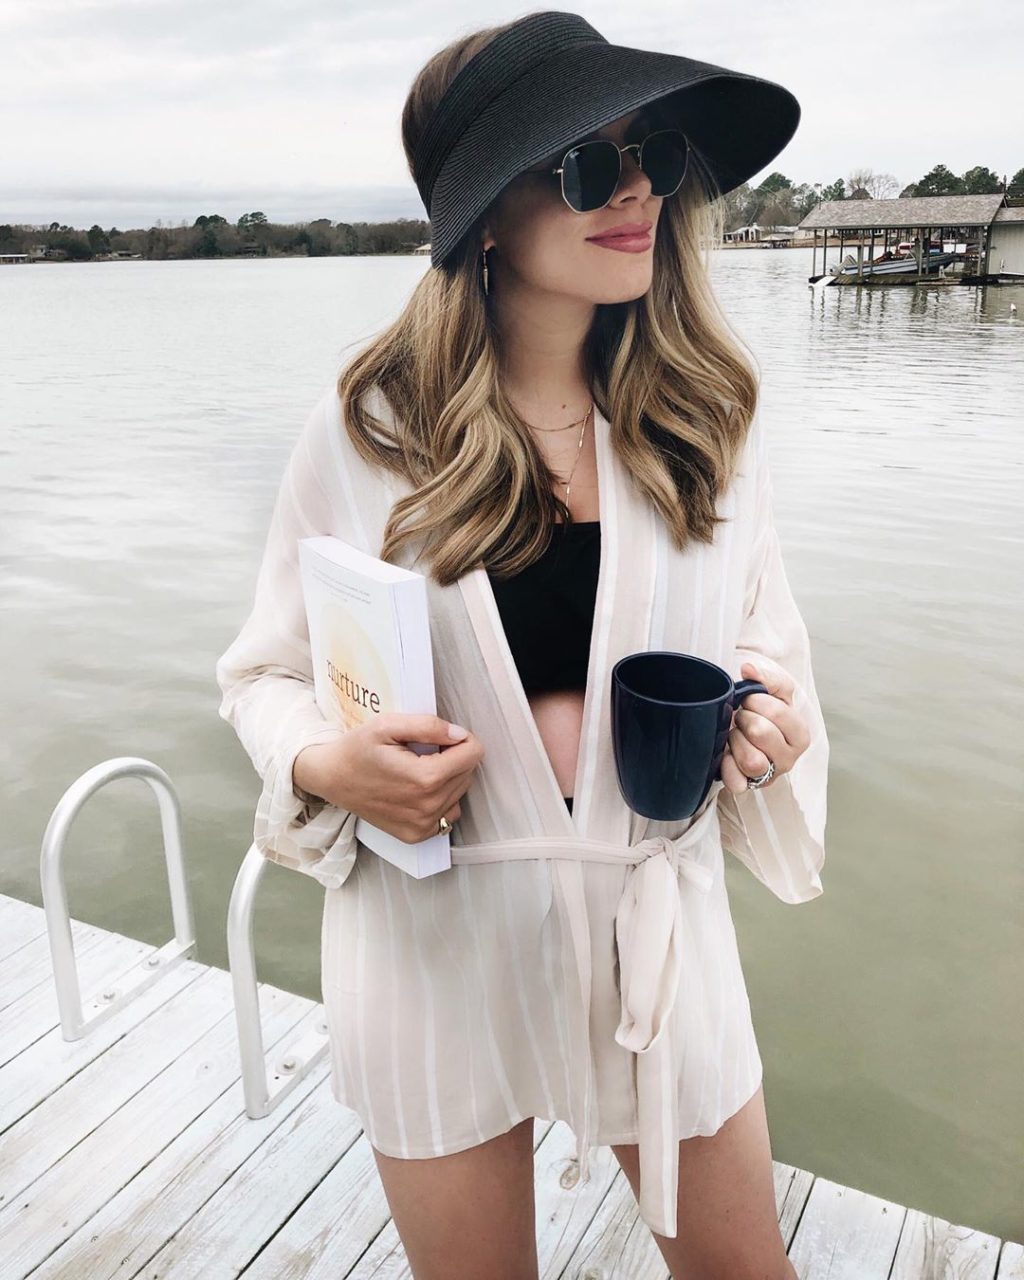 Instagram Lately .07, The Teacher Diva: a Dallas Fashion Blog featuring  Beauty & Lifestyle